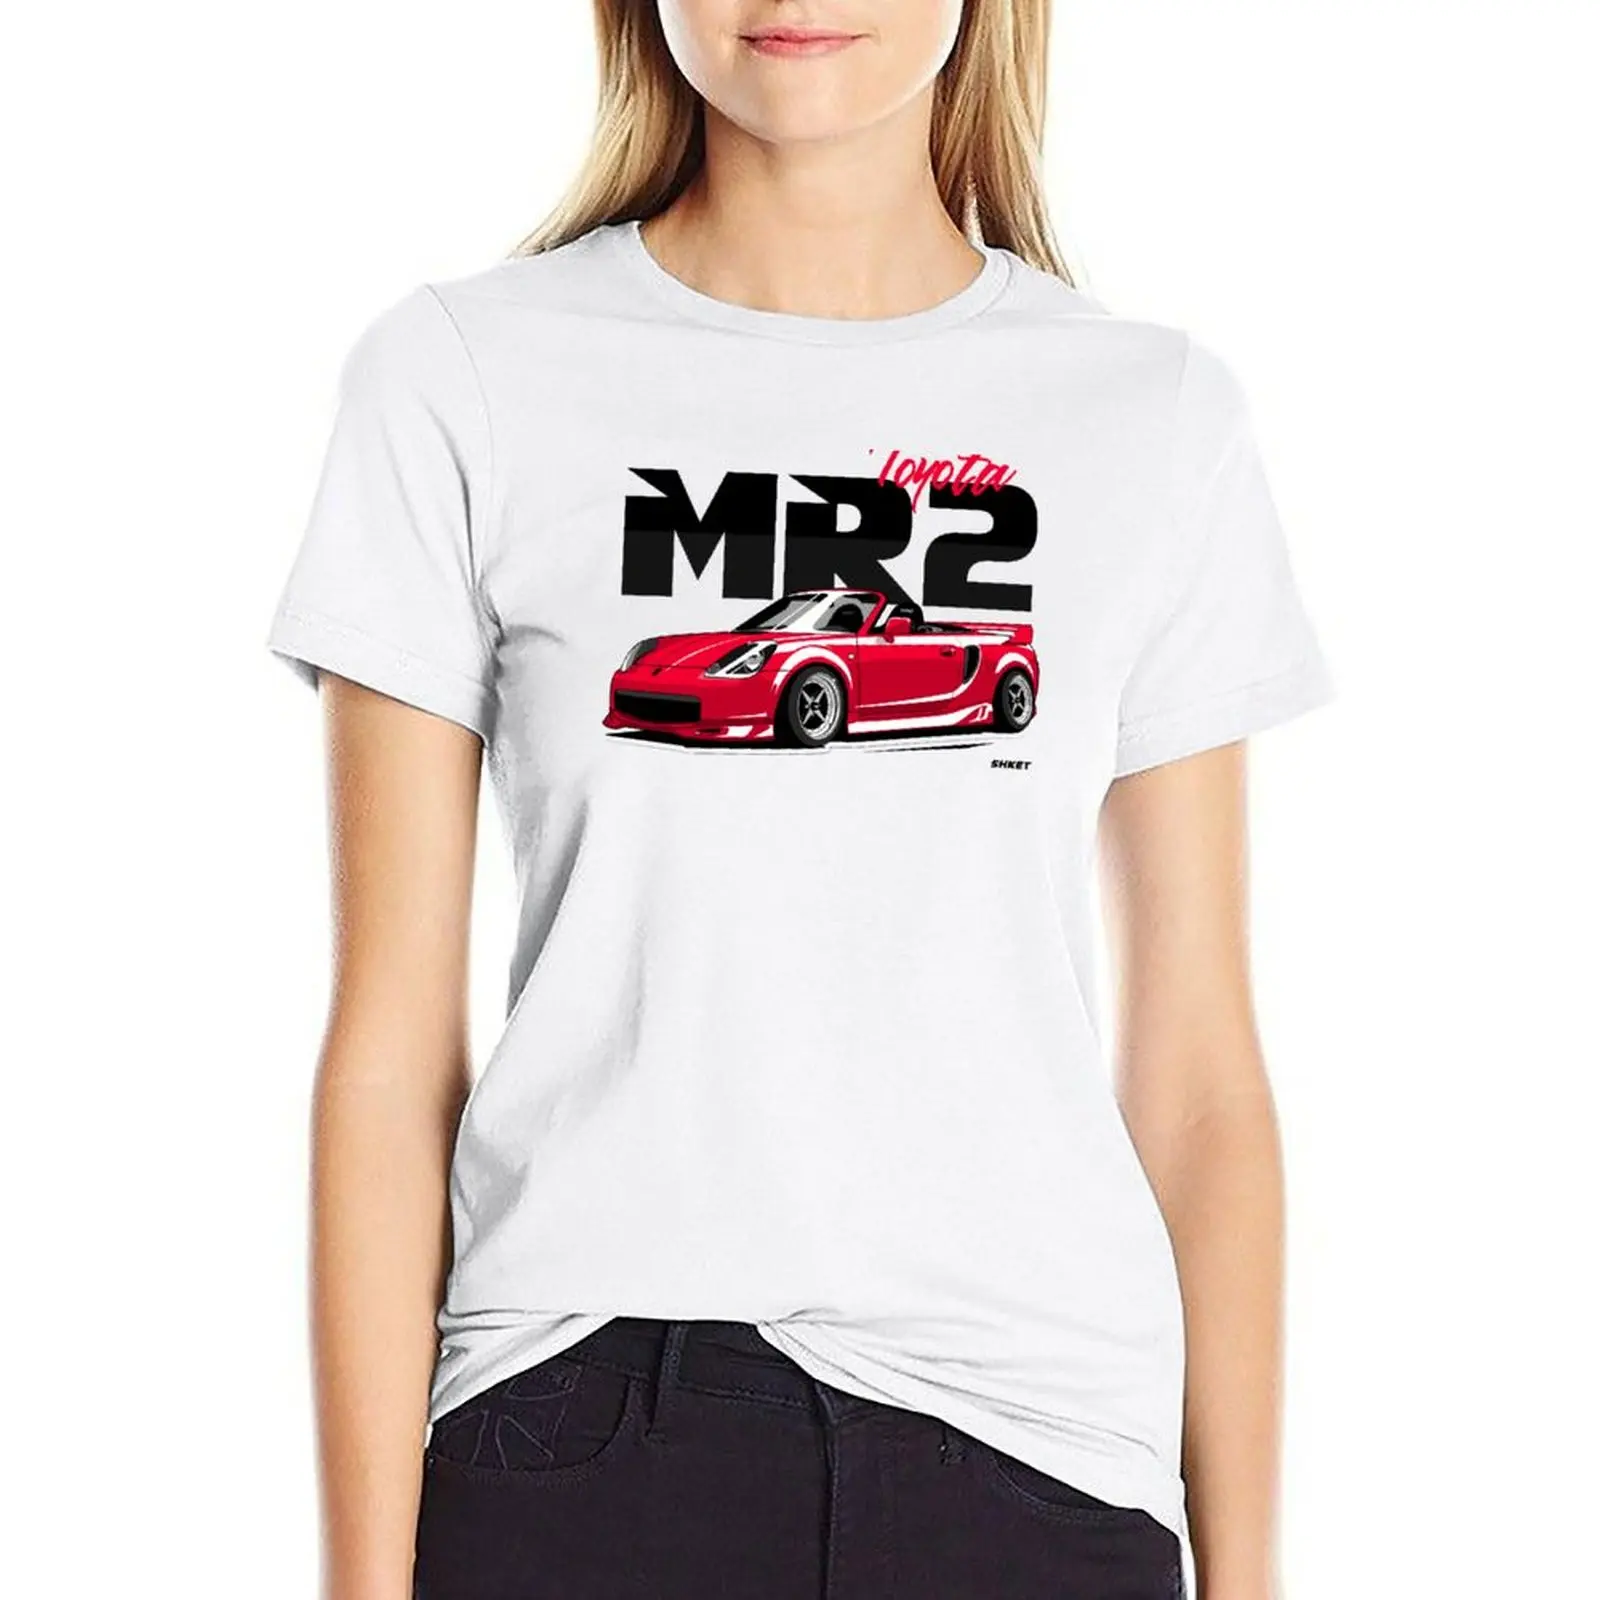 

MR2 ROADSTER STANCED T-shirt Female clothing Short sleeve tee cropped t shirts for Women